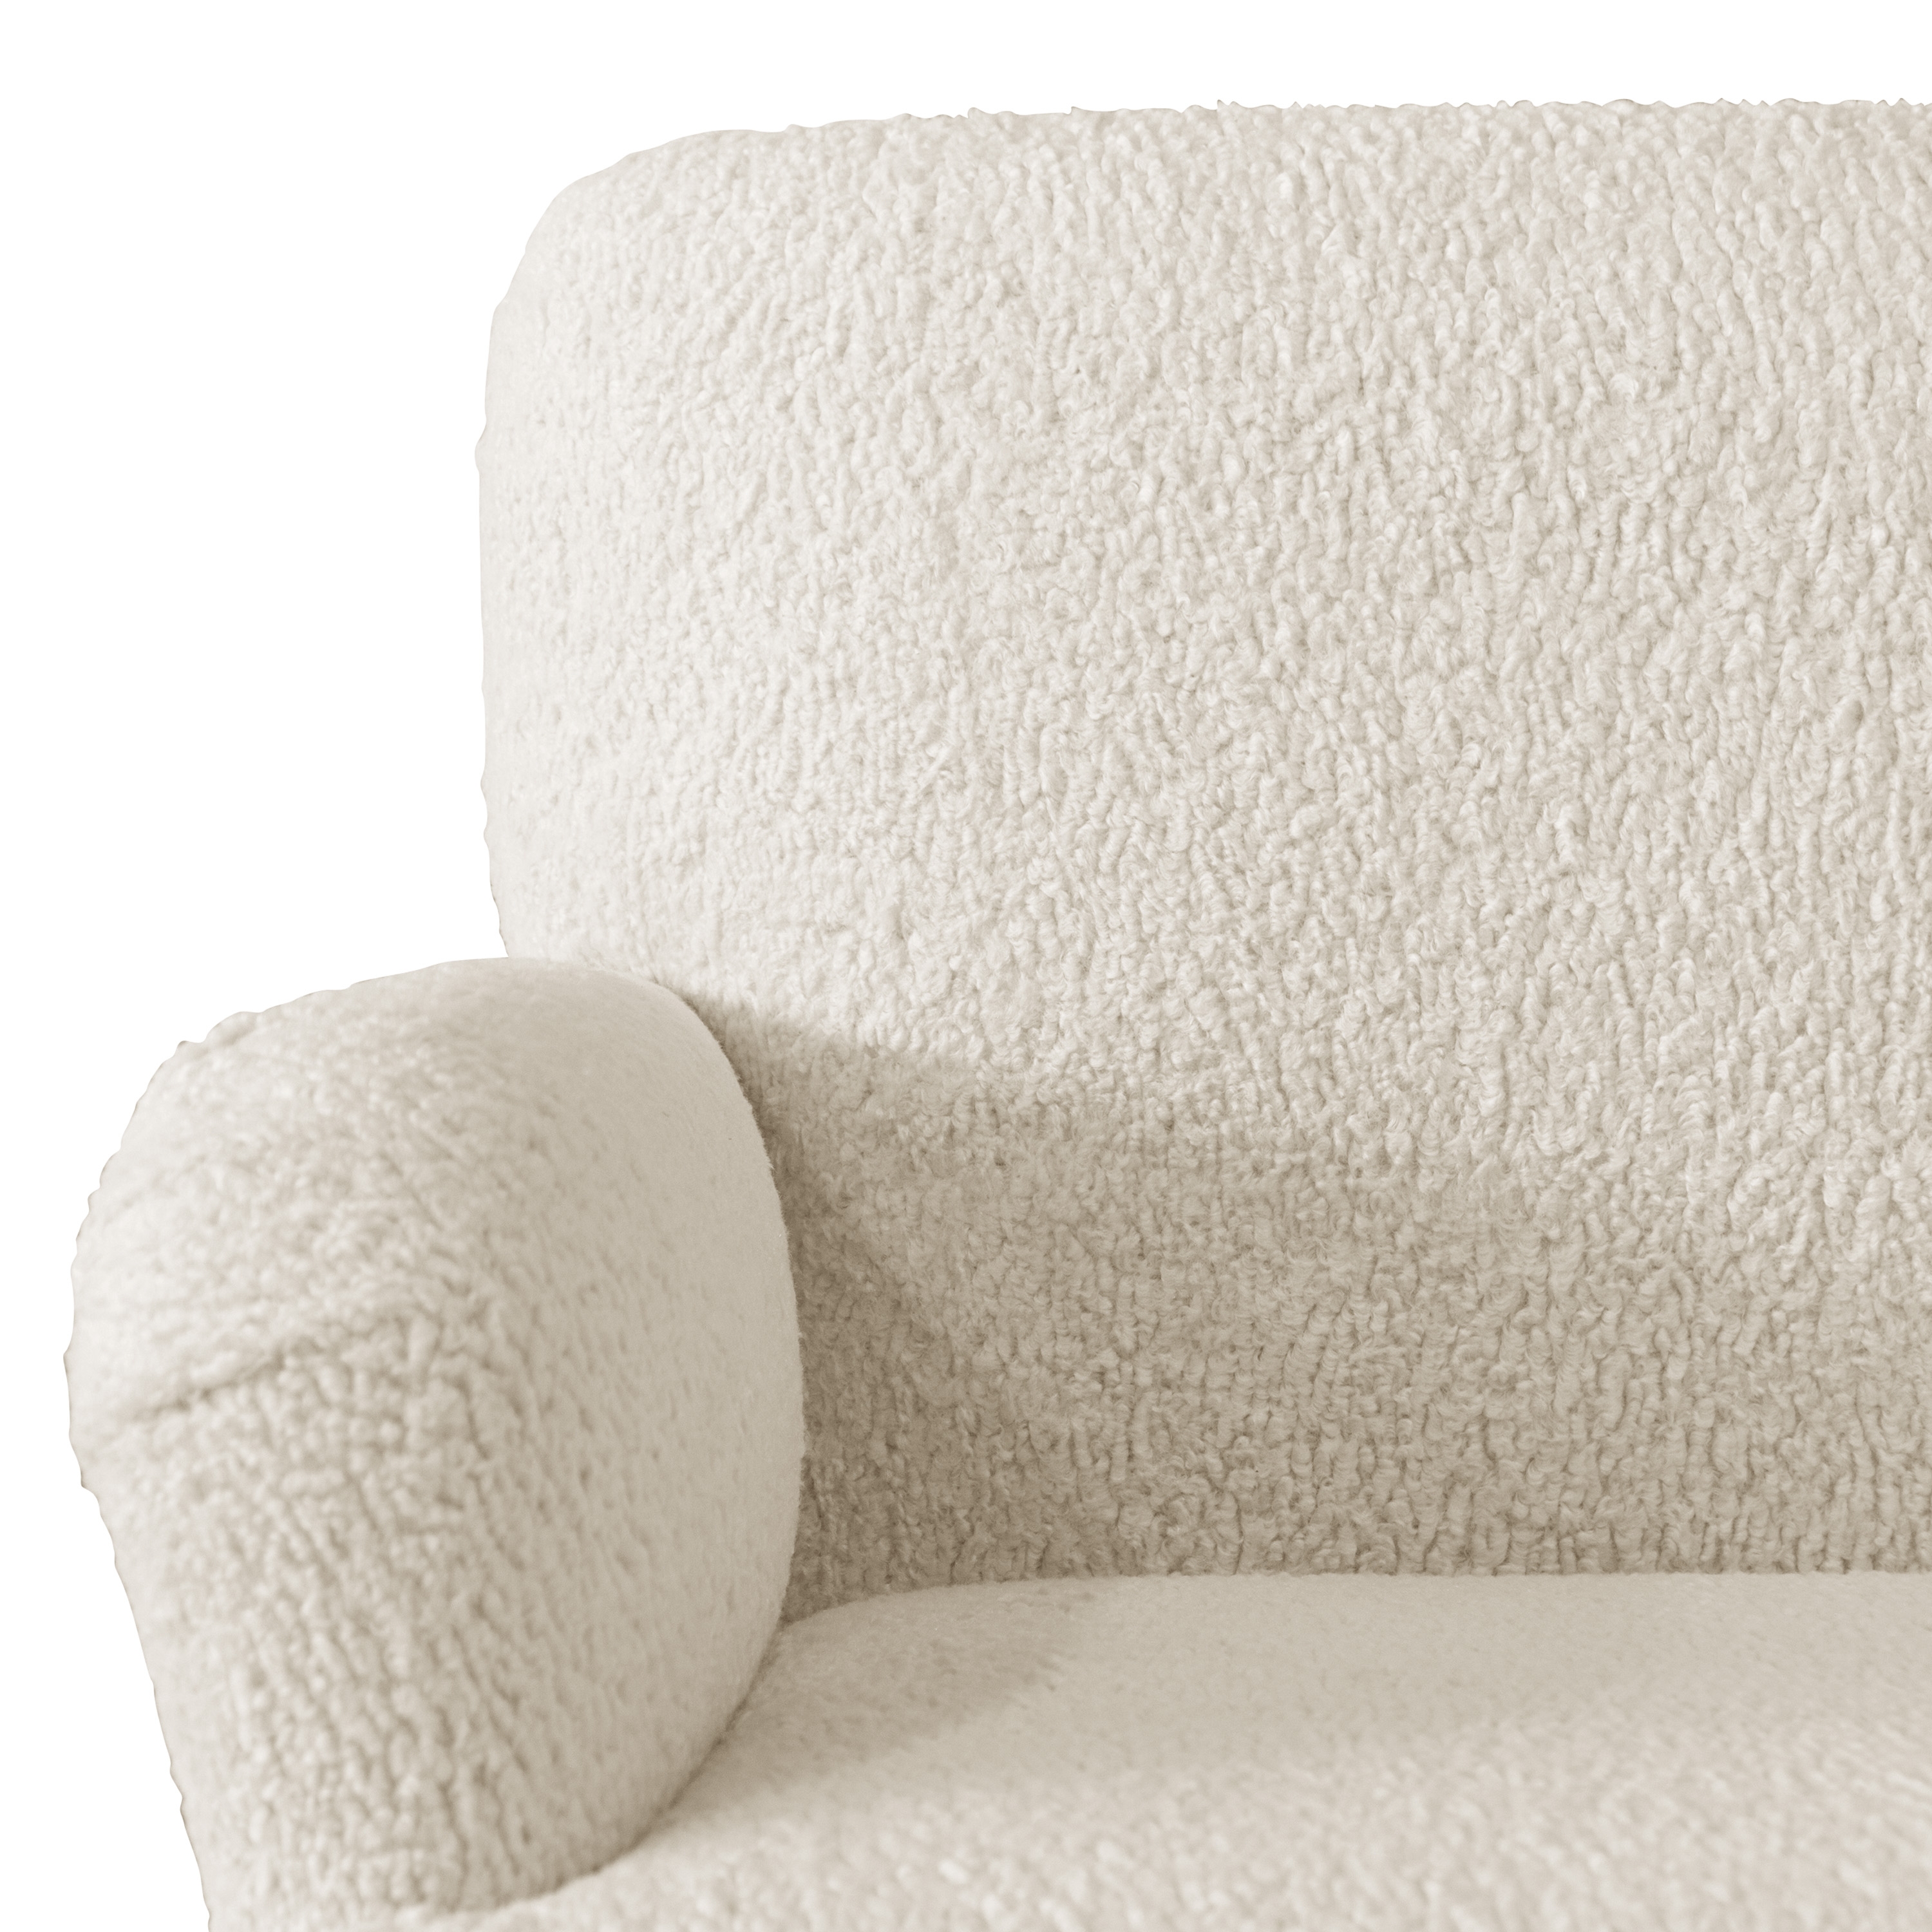 Norwood Chair in Sheepskin Natural - Image 5